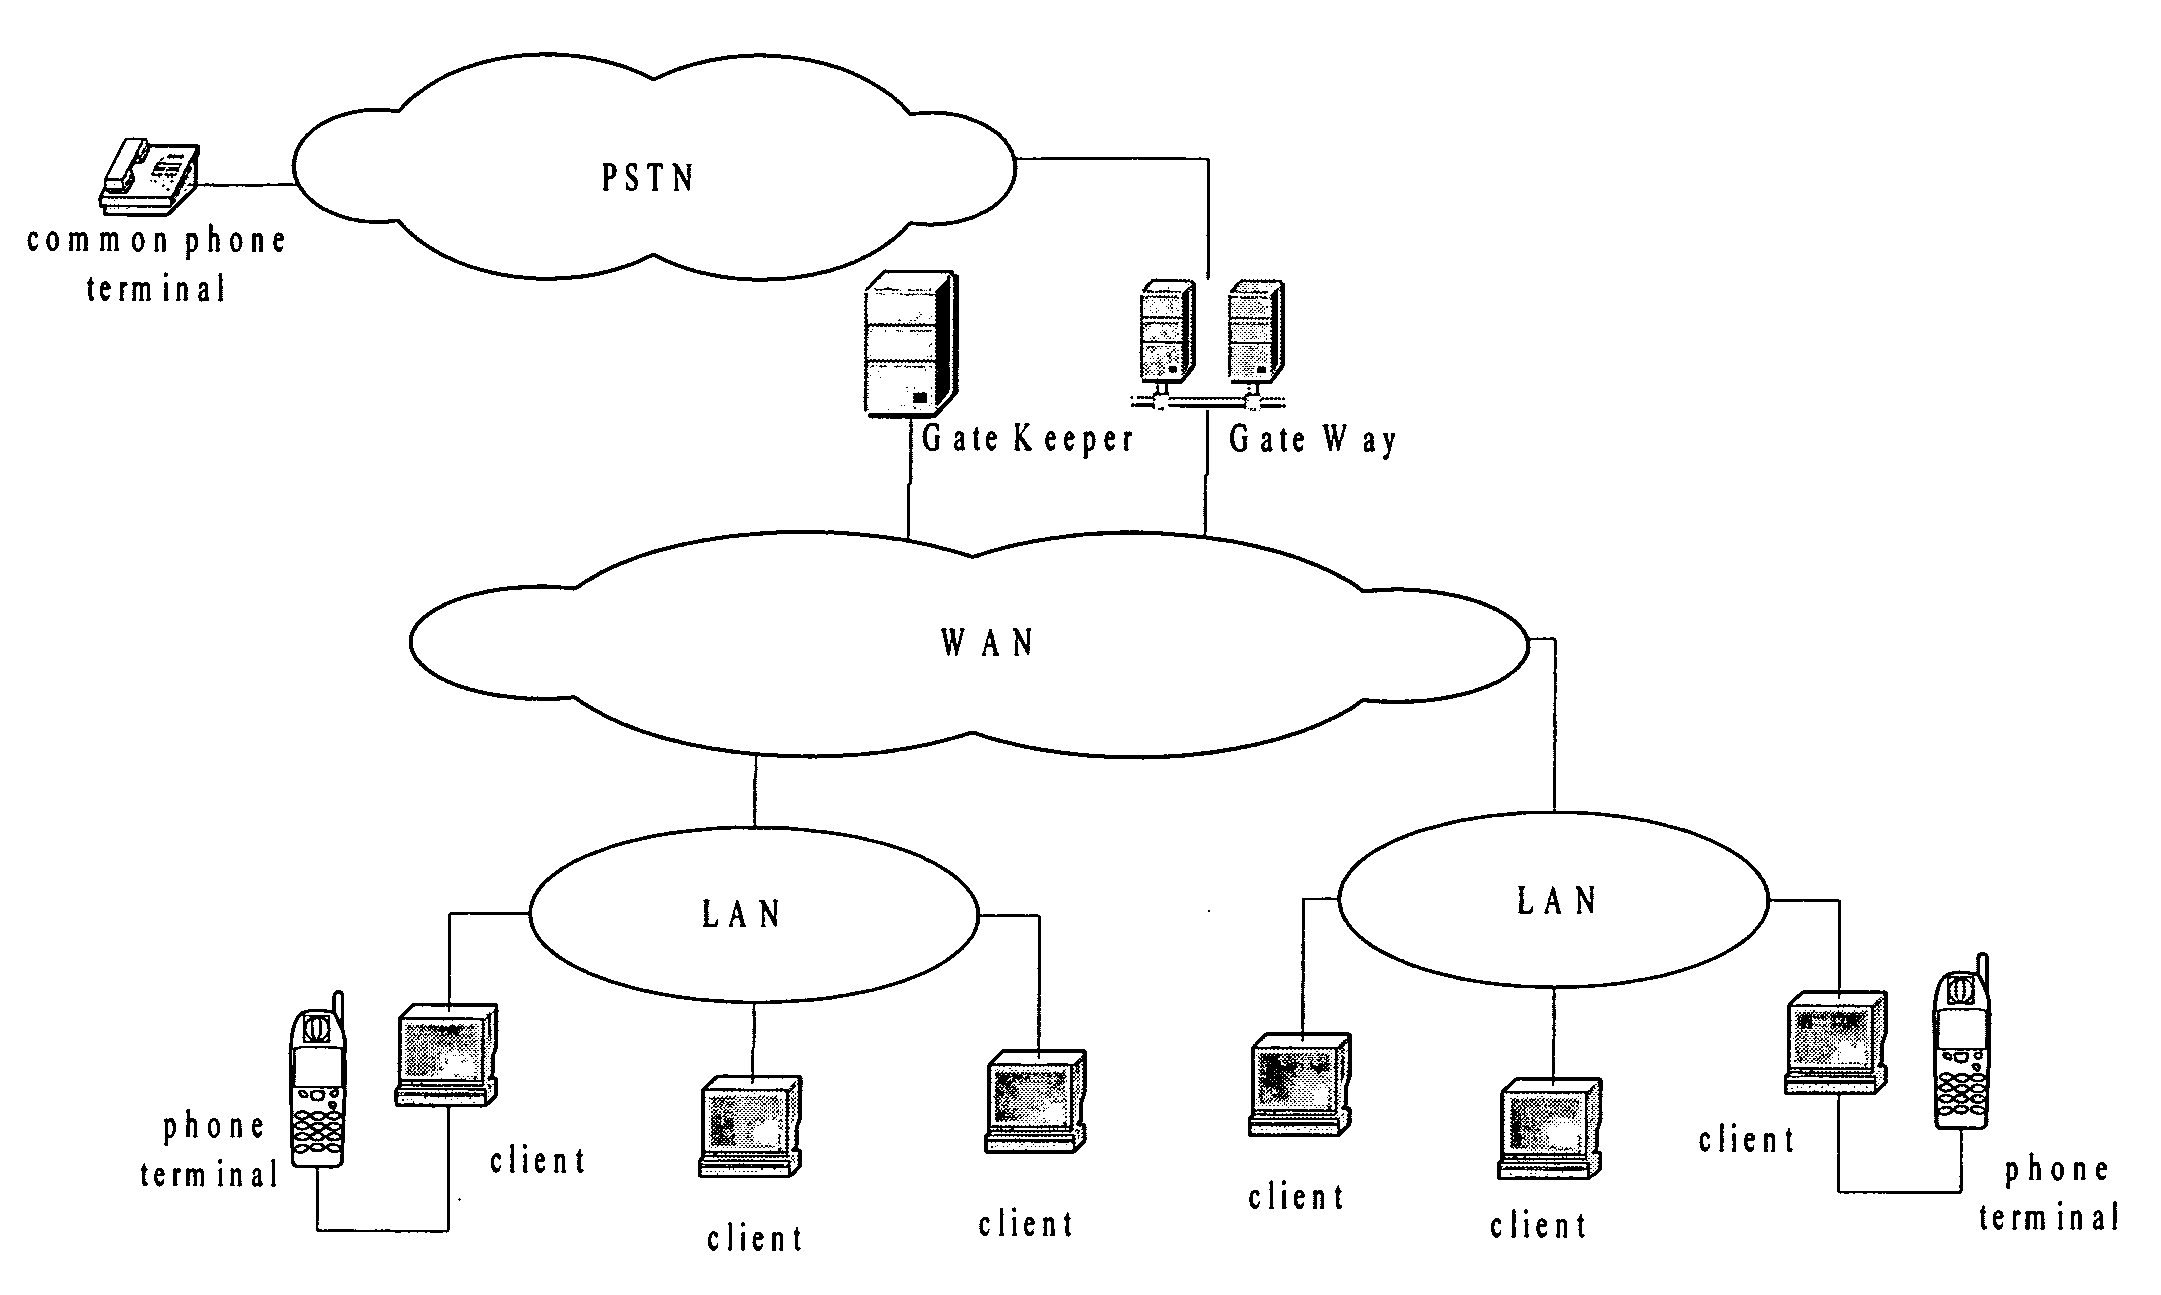 System and method for voice over internet protocol communication using an instant messenger